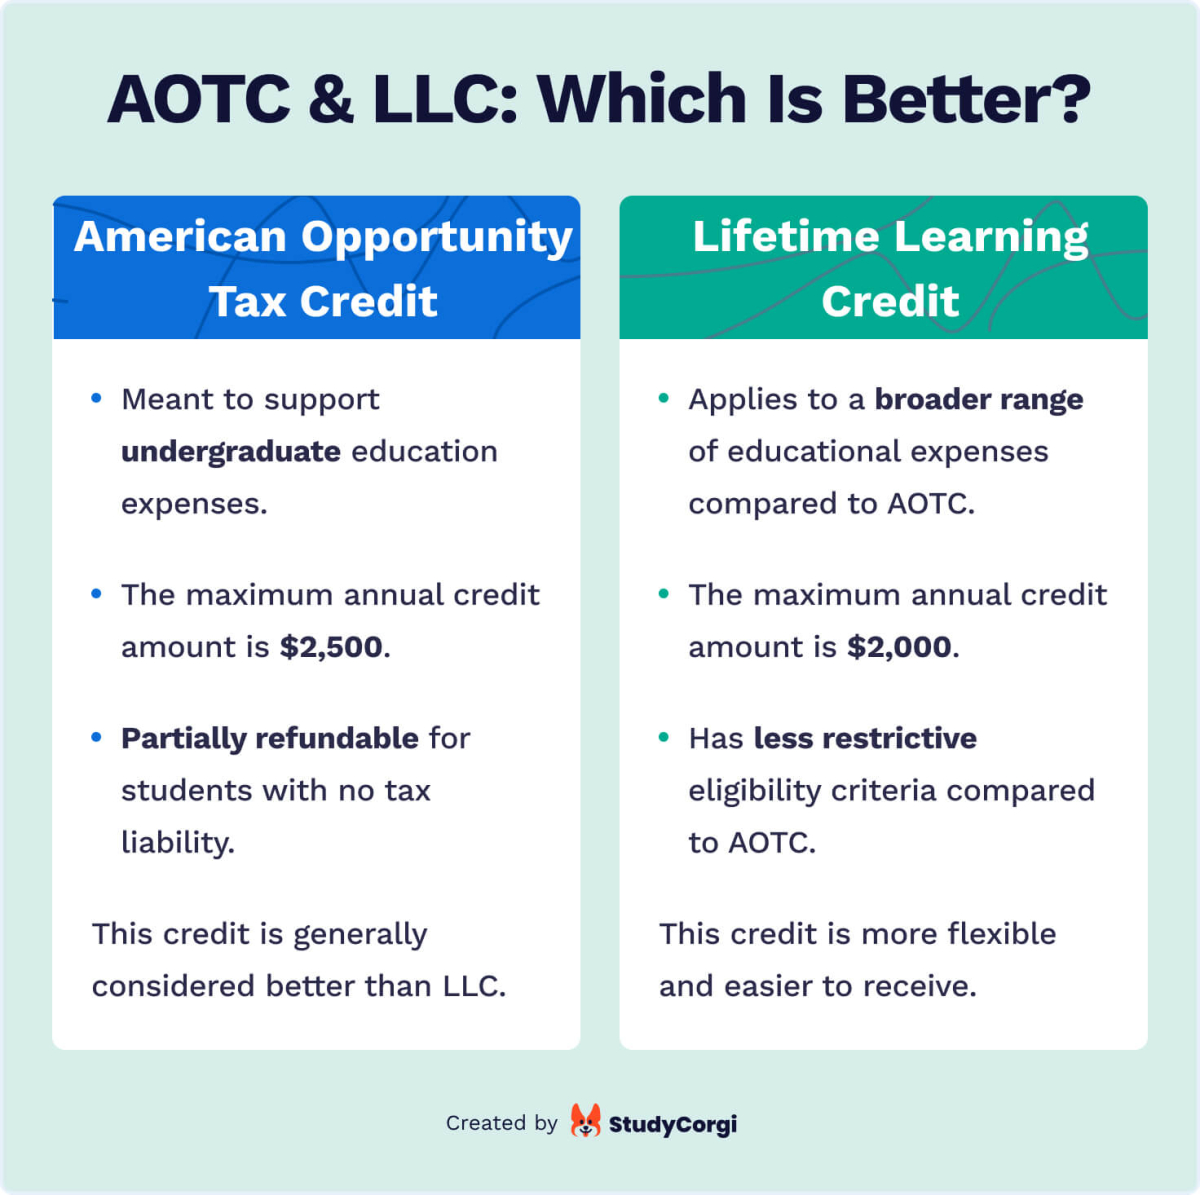 The picture compares the American Opportunity Tax Credit and the Lifetime Learning Credit.